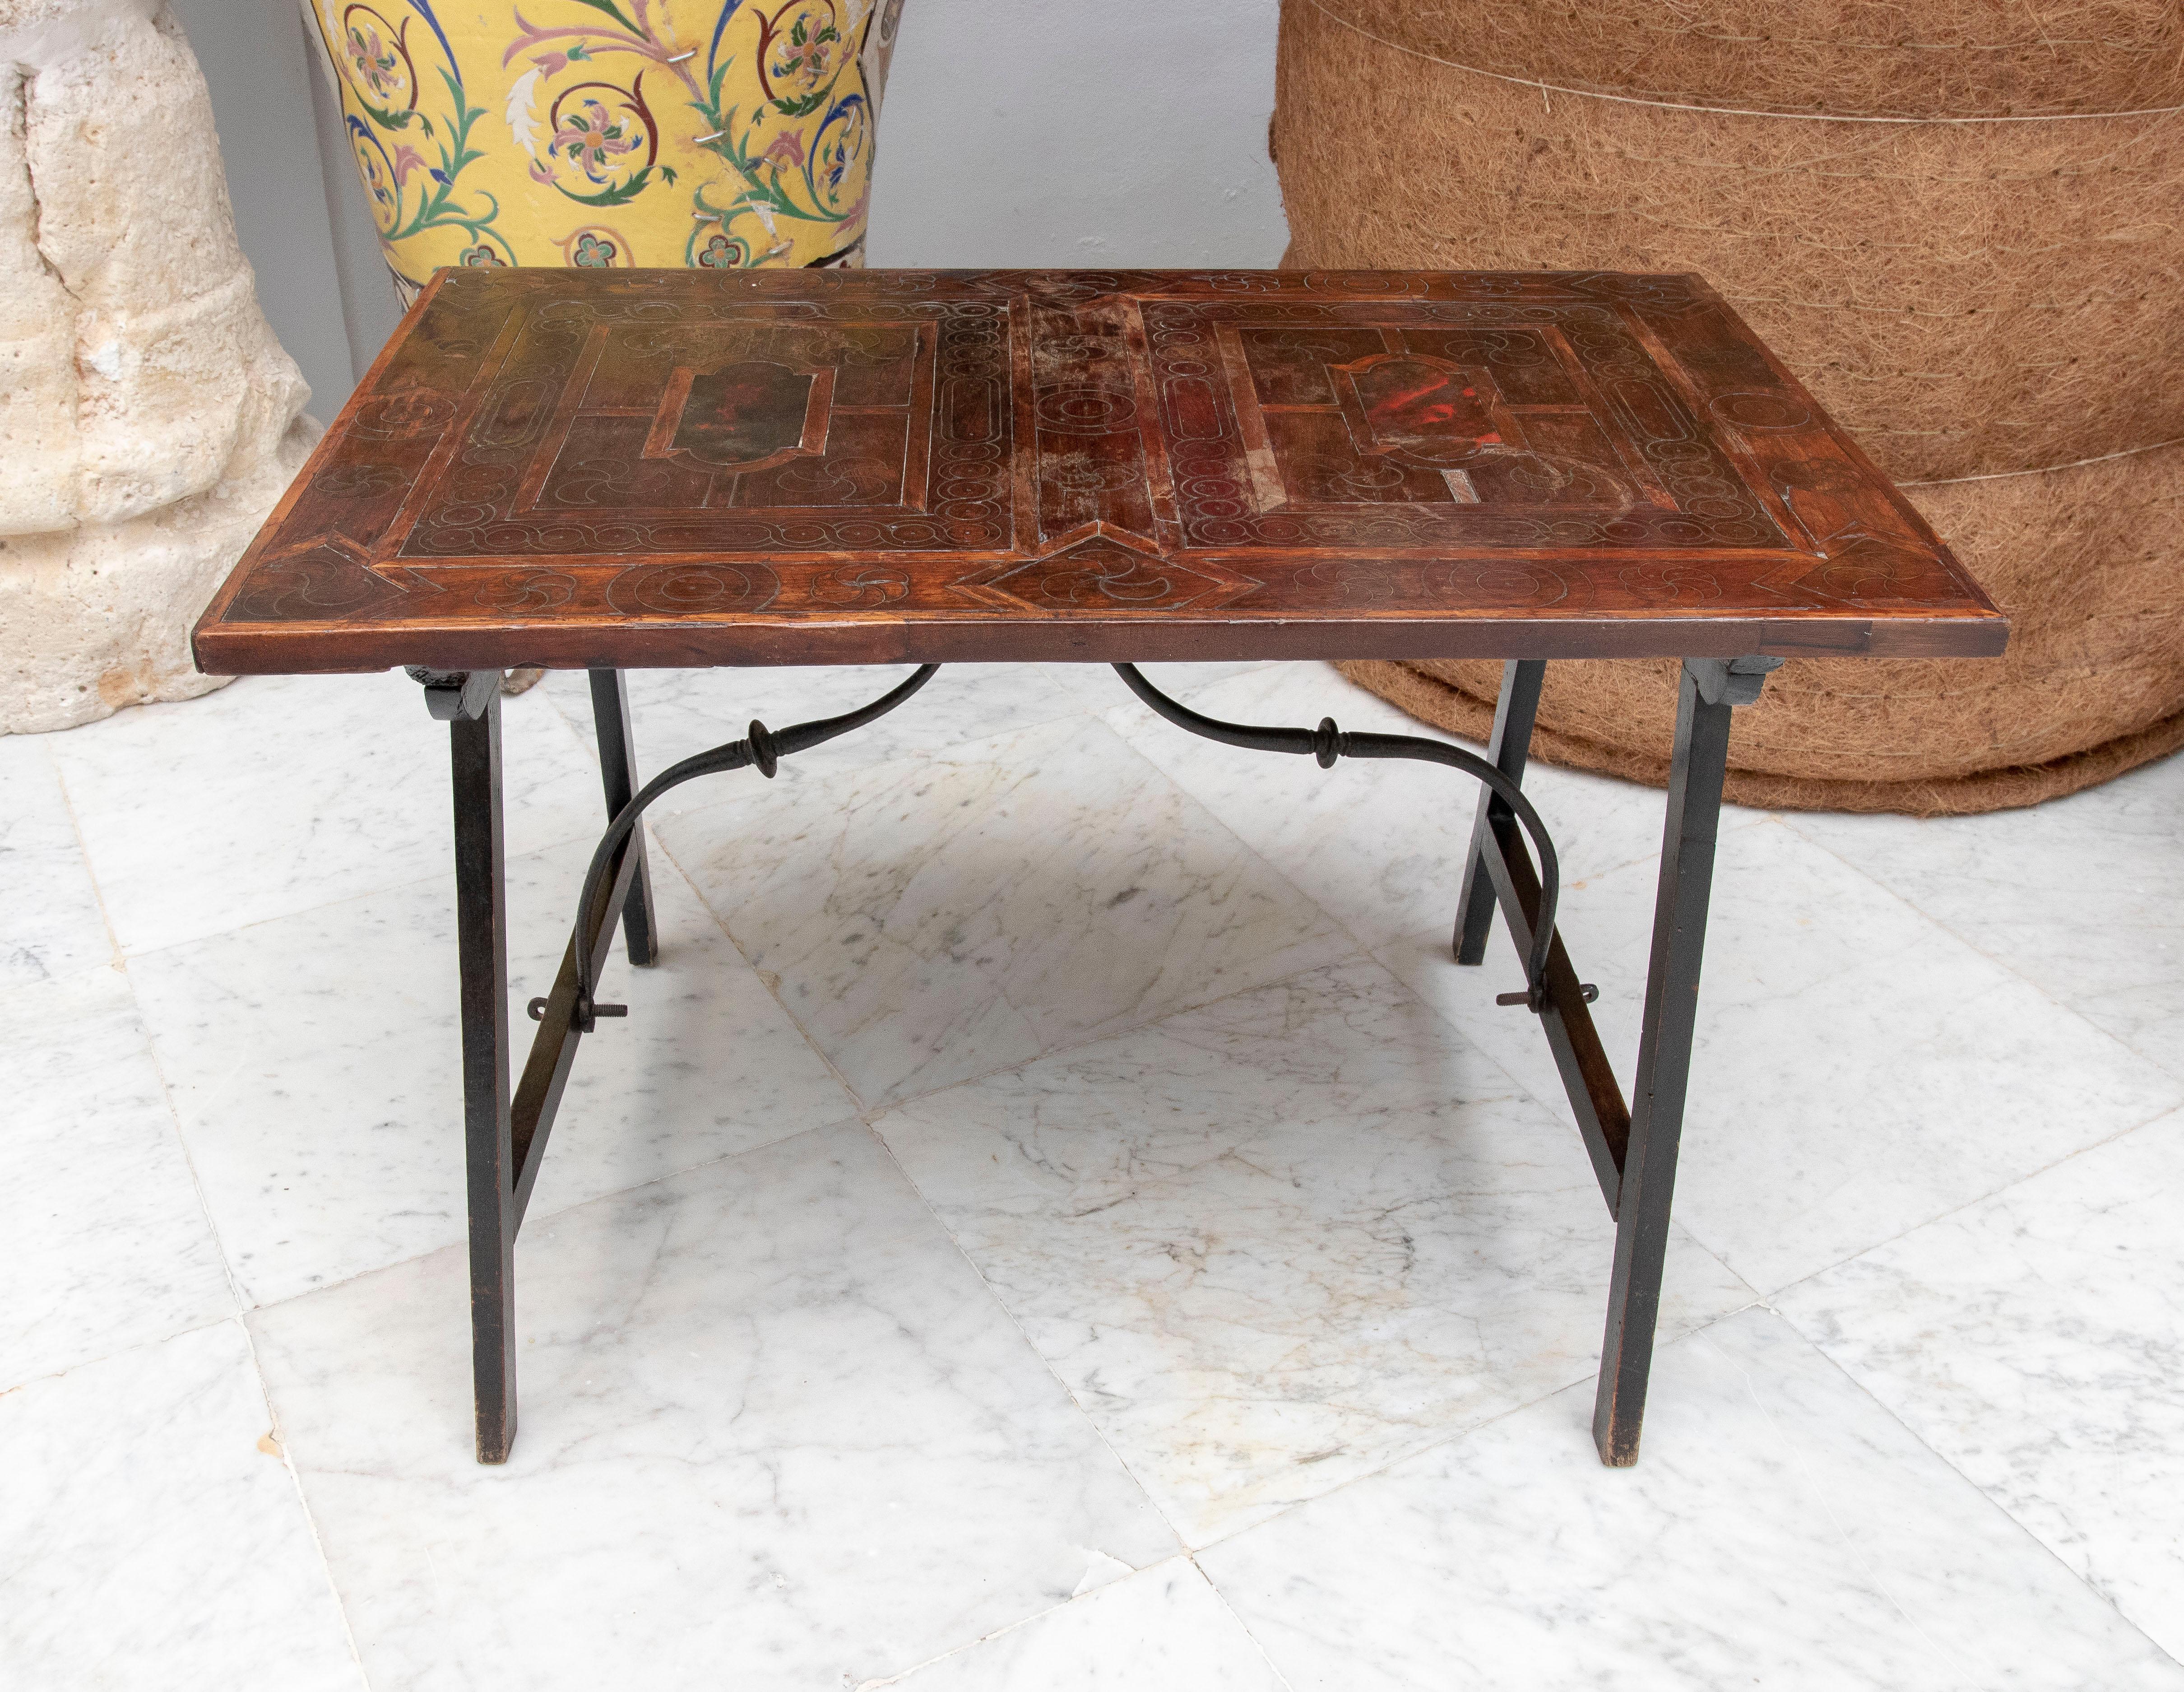 17th century Spanish wooden table with inlays.